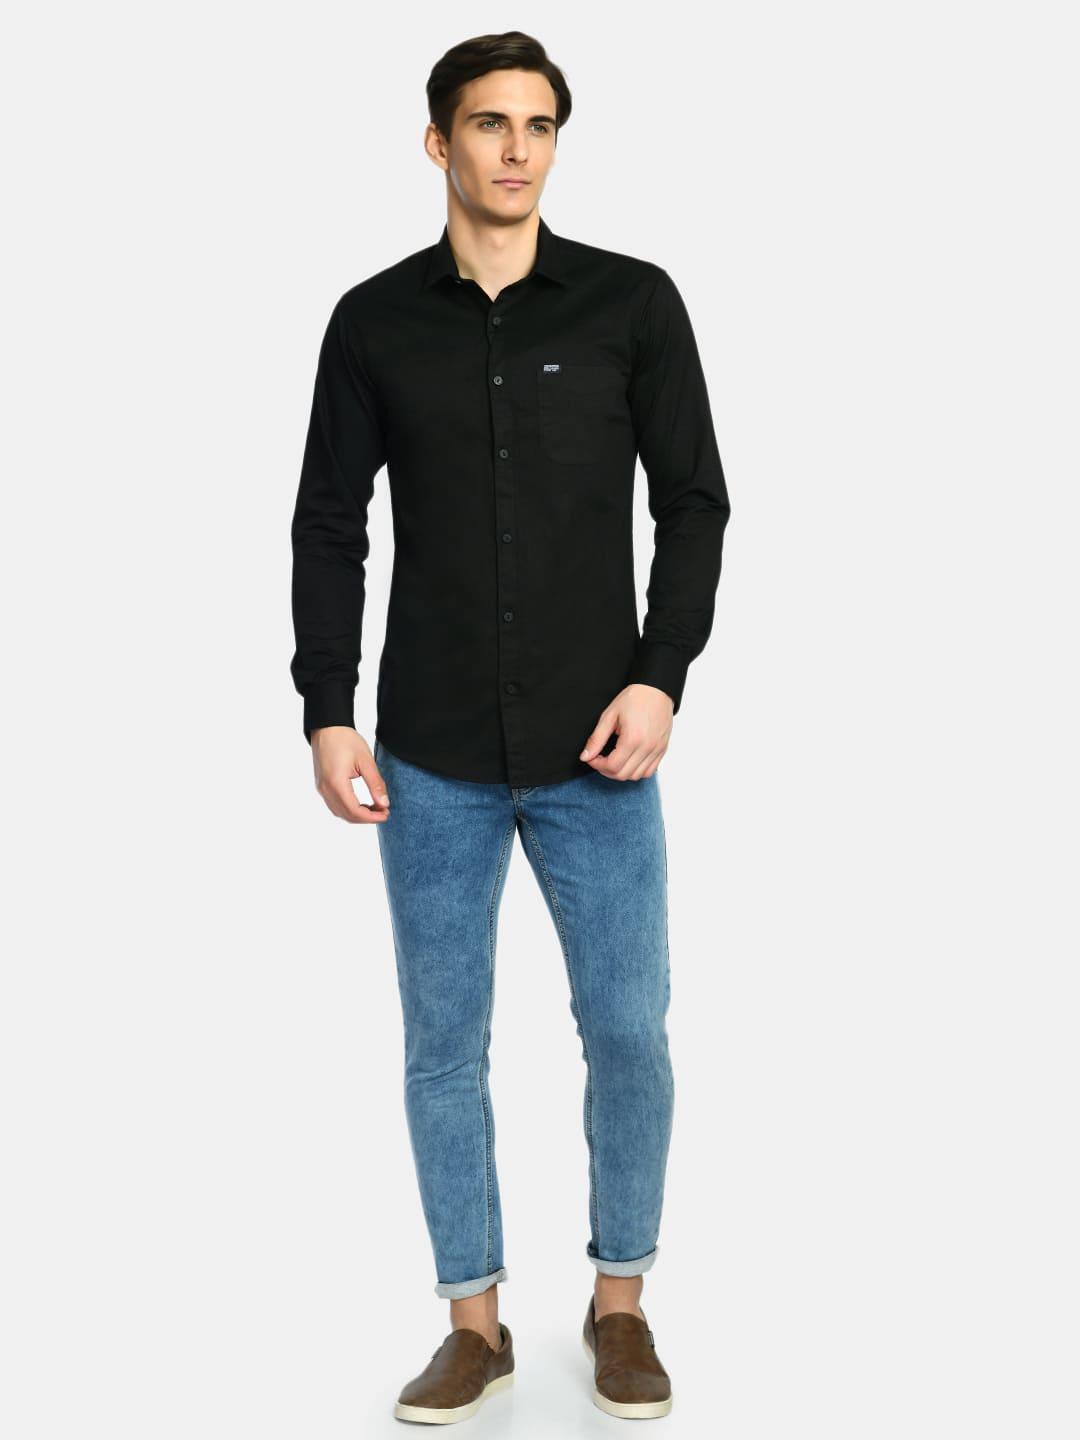 Men's Ink Black Solid Cotton Casual Shirt